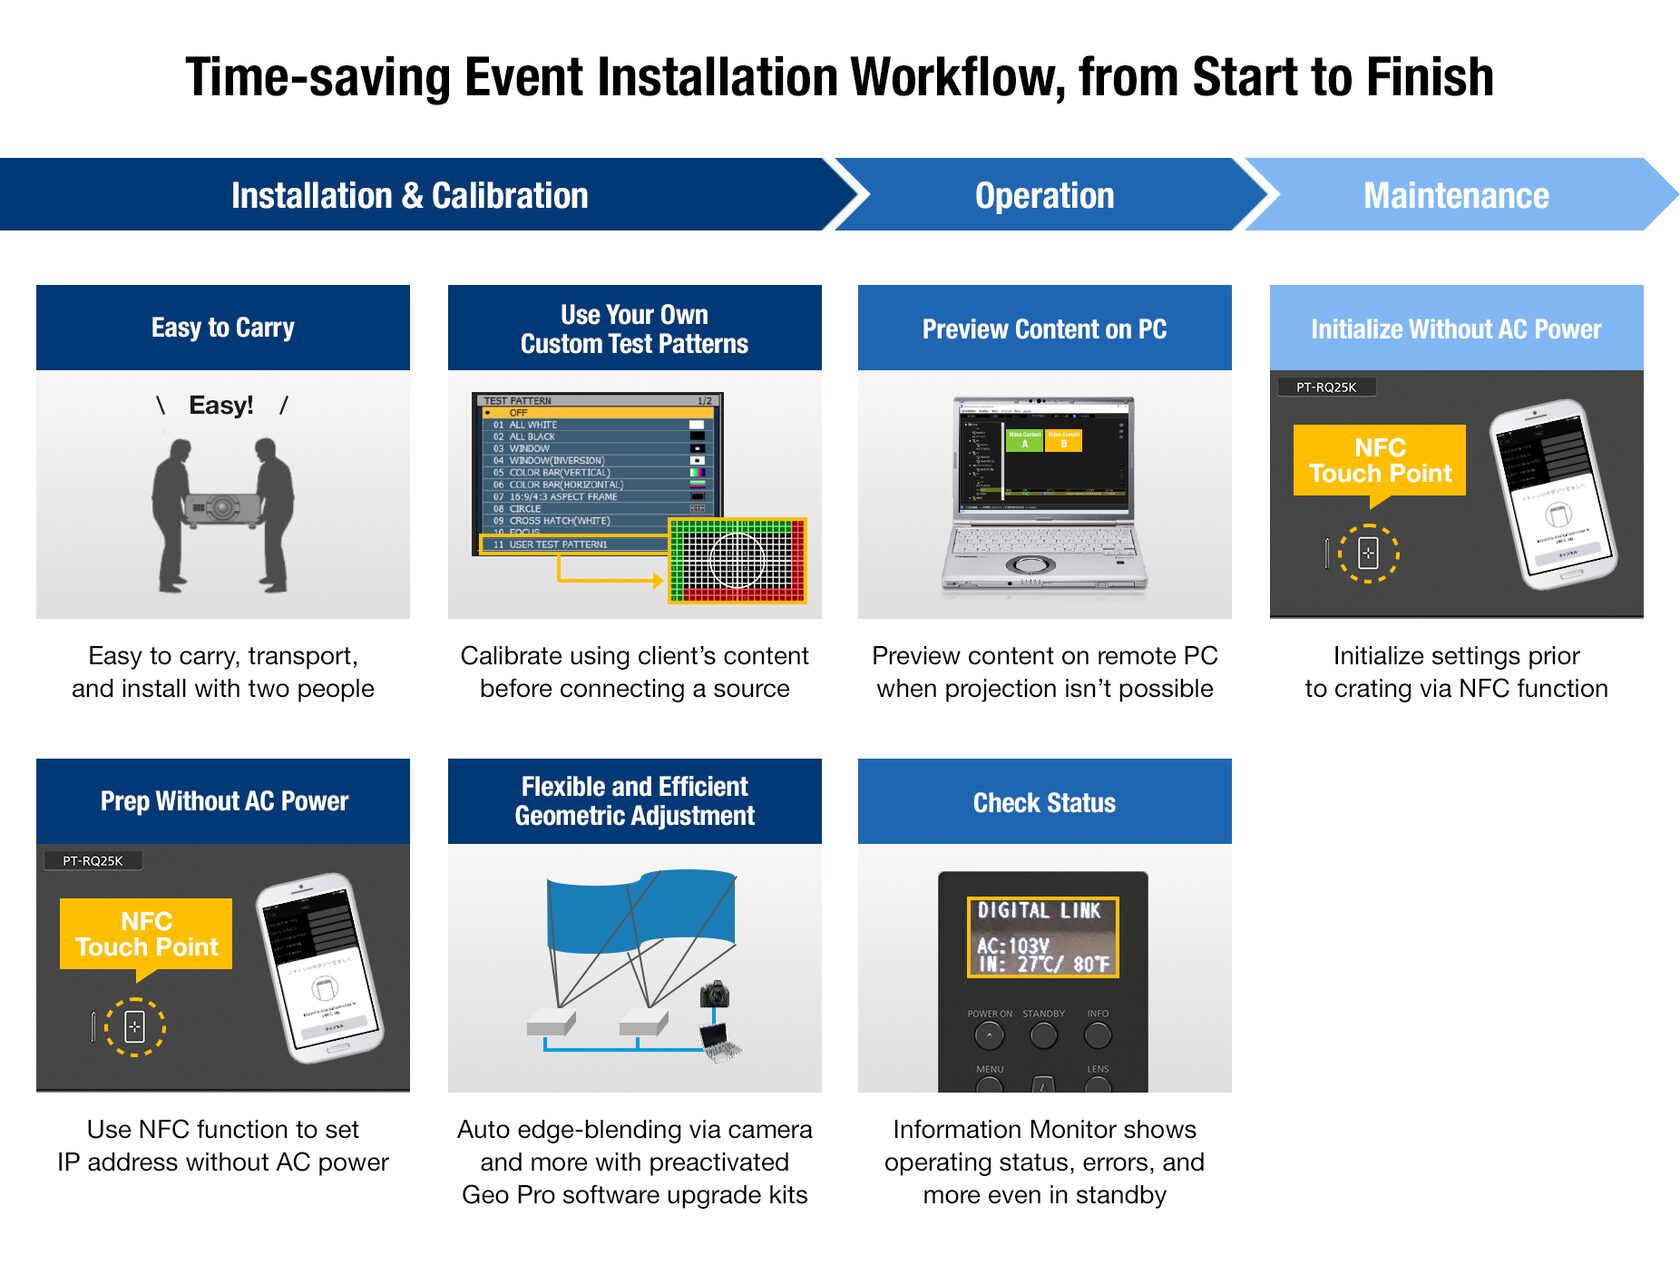 Time-saving event installation workflow infographic